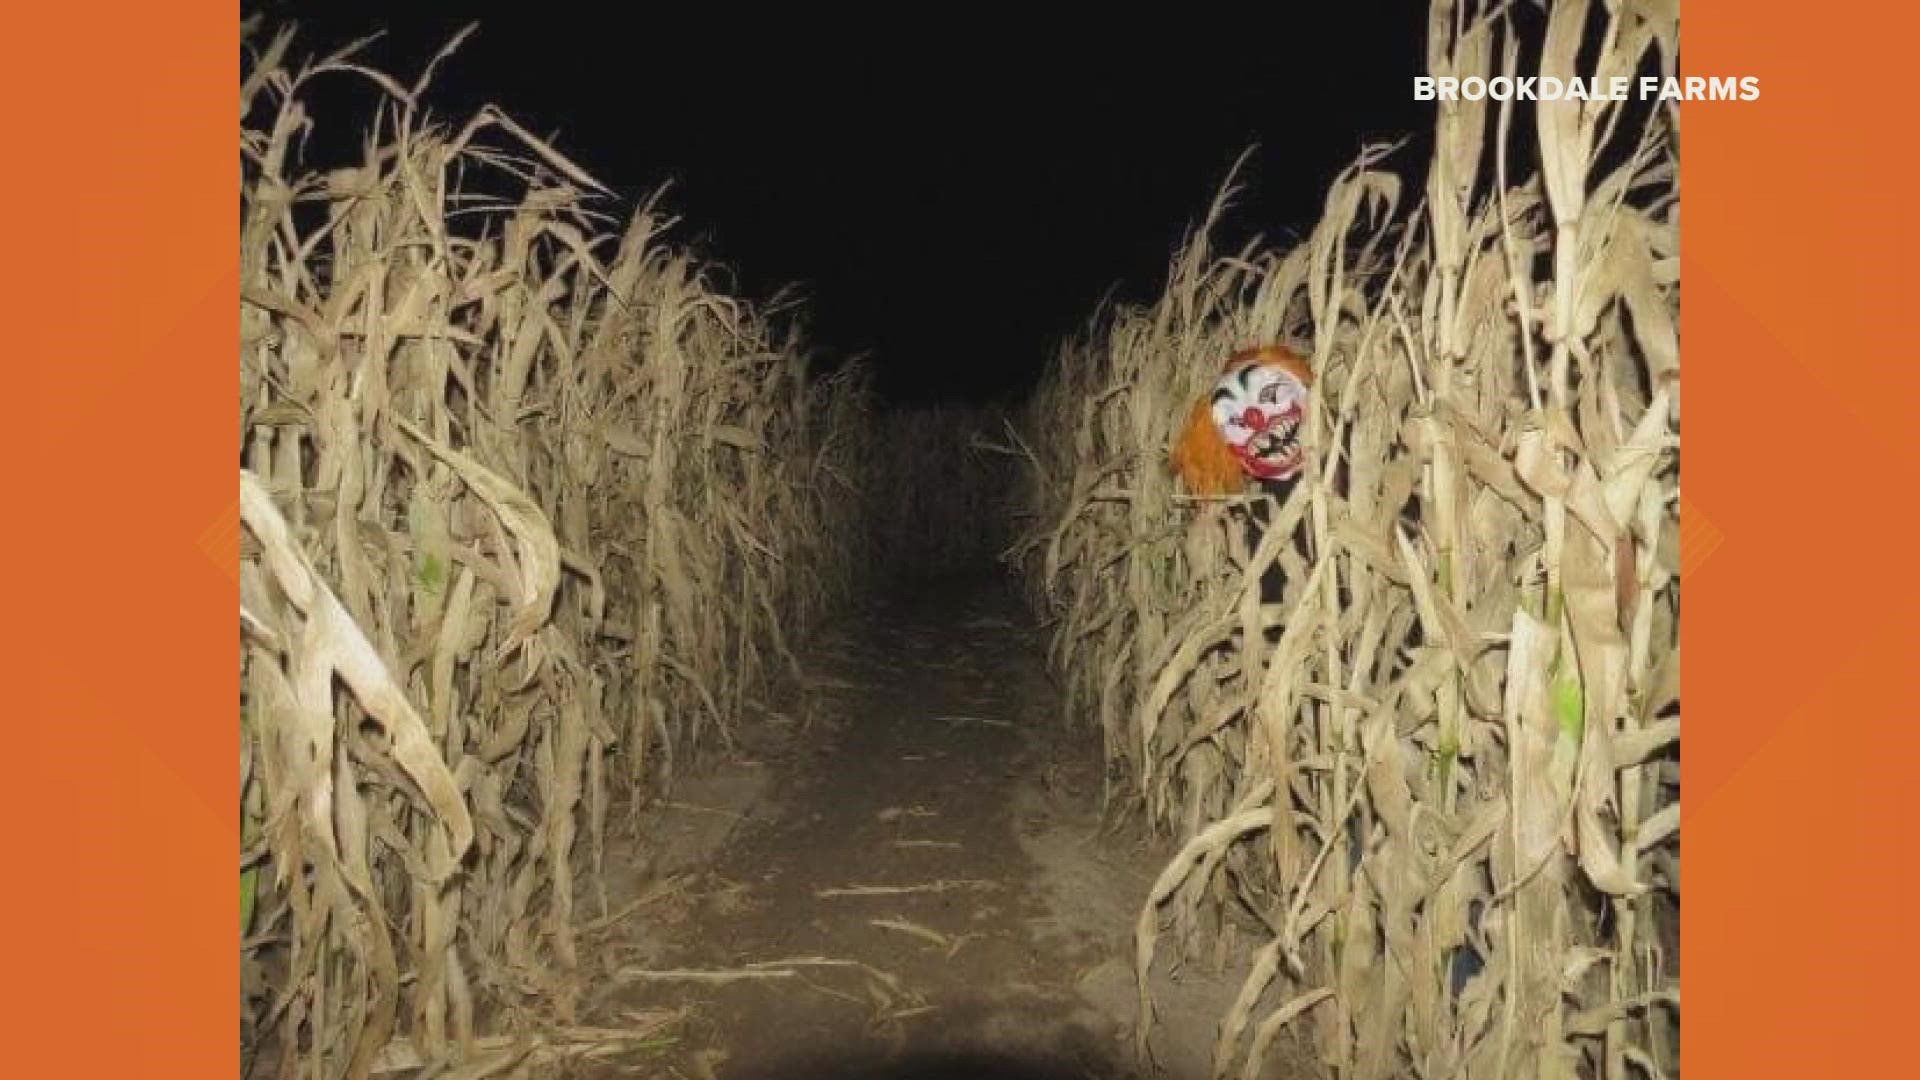 Brookdale Farms' haunted hayride and corn maze massacre are happening at Eureka Fear Farm. Also check out The Darkness and Creepyworld in Soulard.